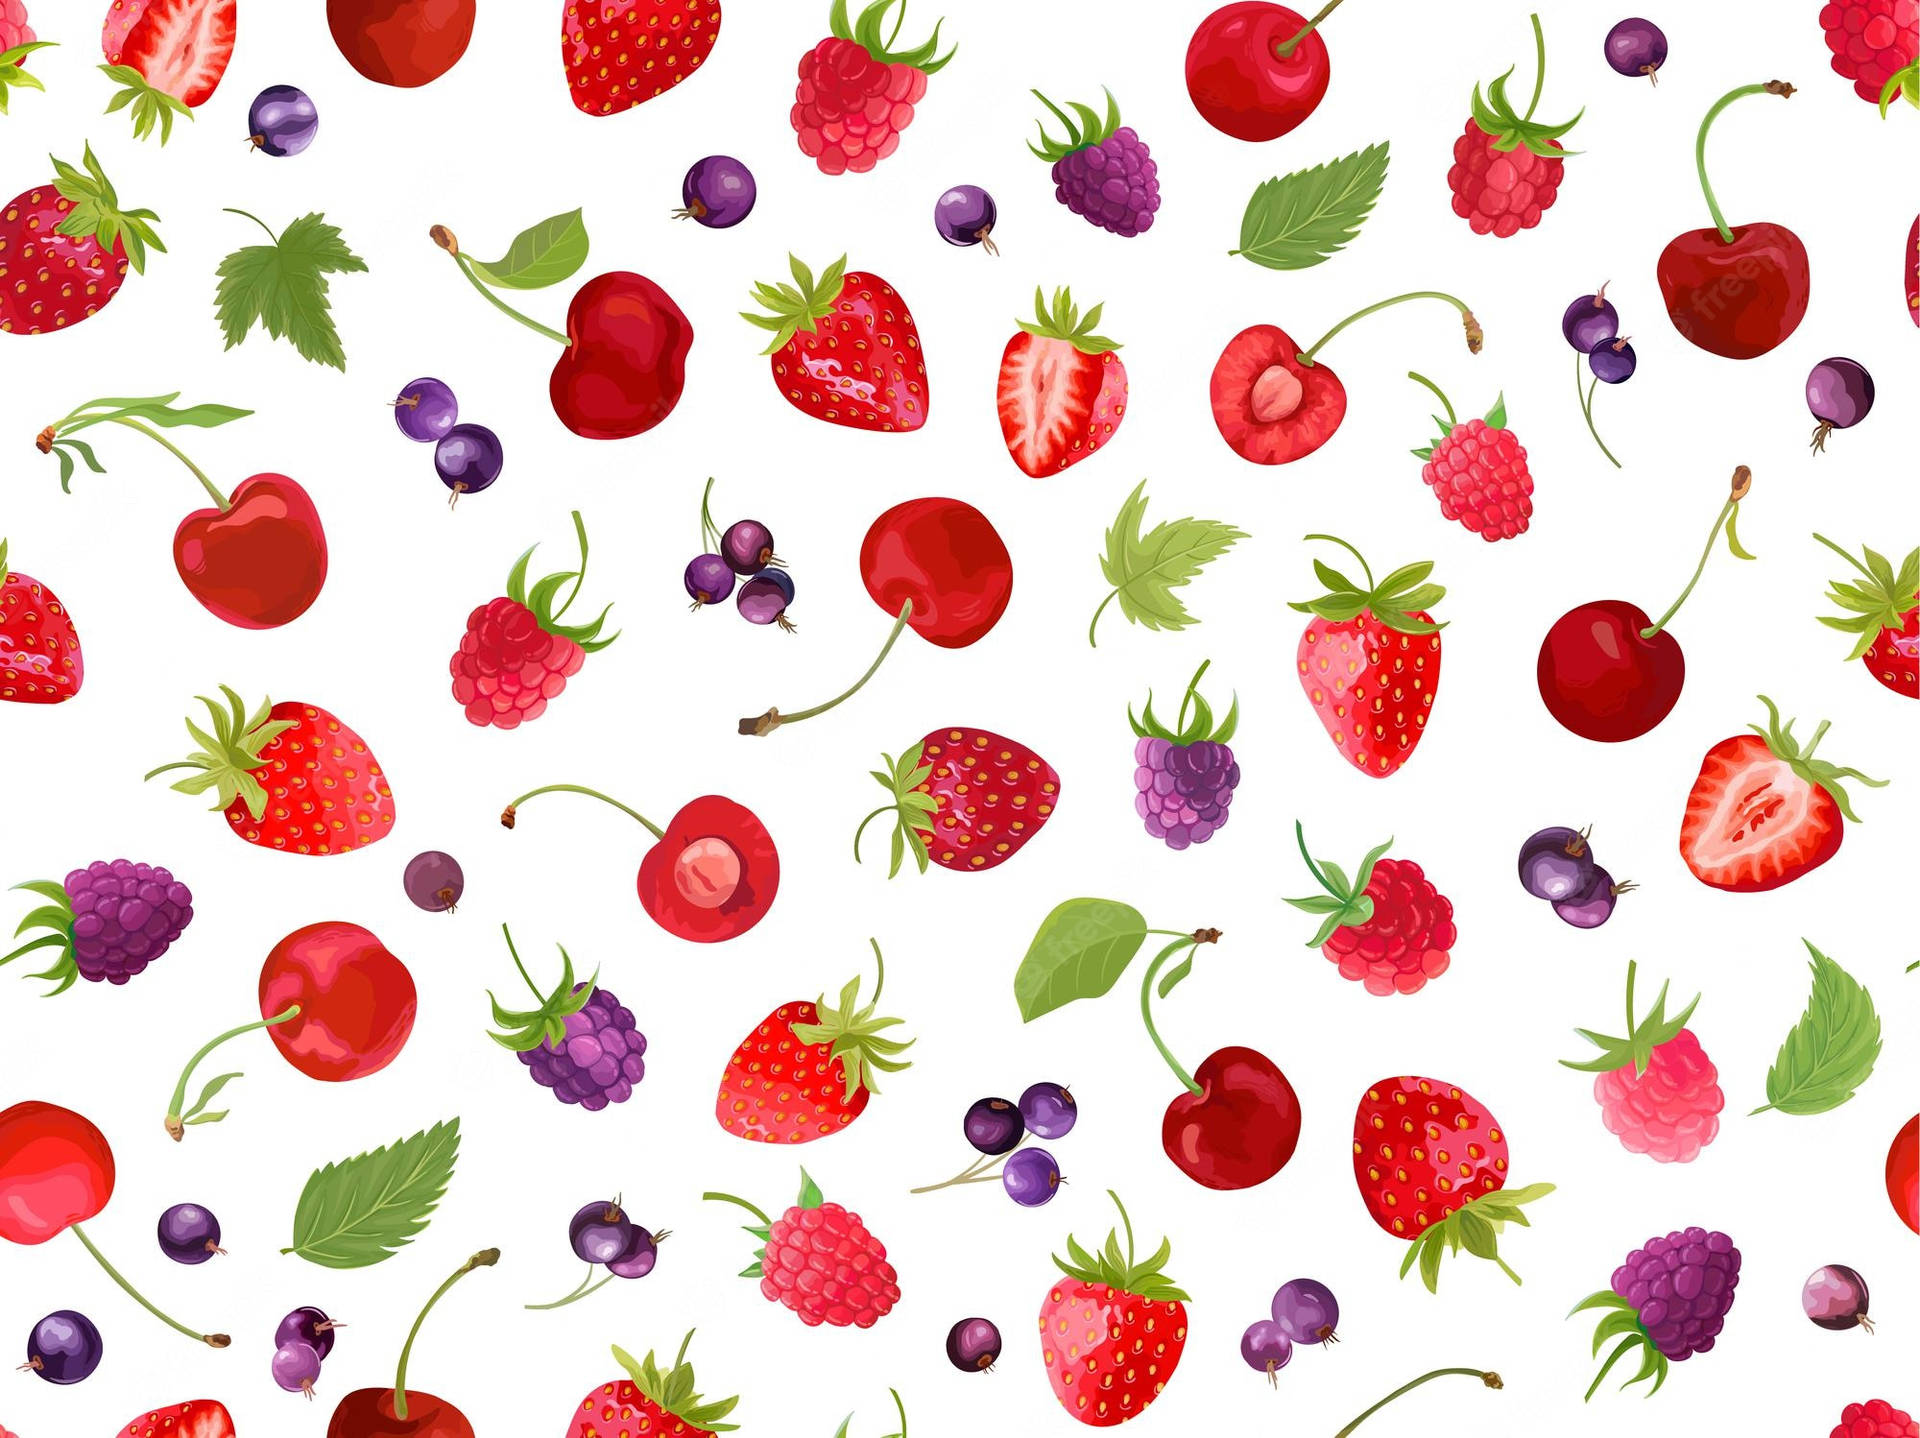 Tropical Fruits Currant Strawberry Raspberry Watercolor Art Wallpaper